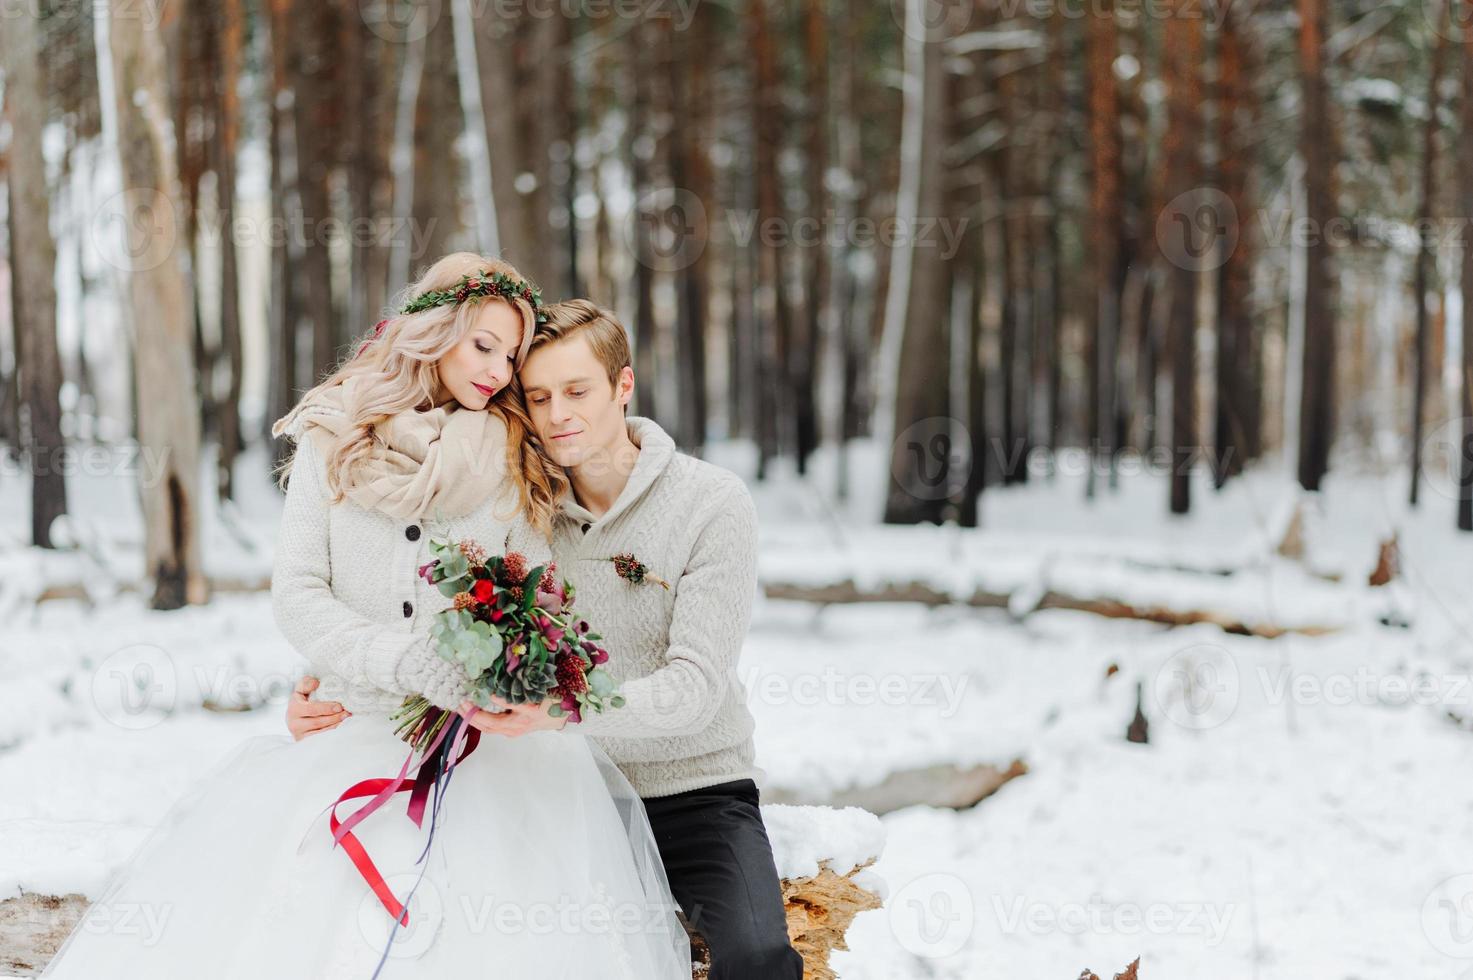 Winter wedding photosession in nature photo